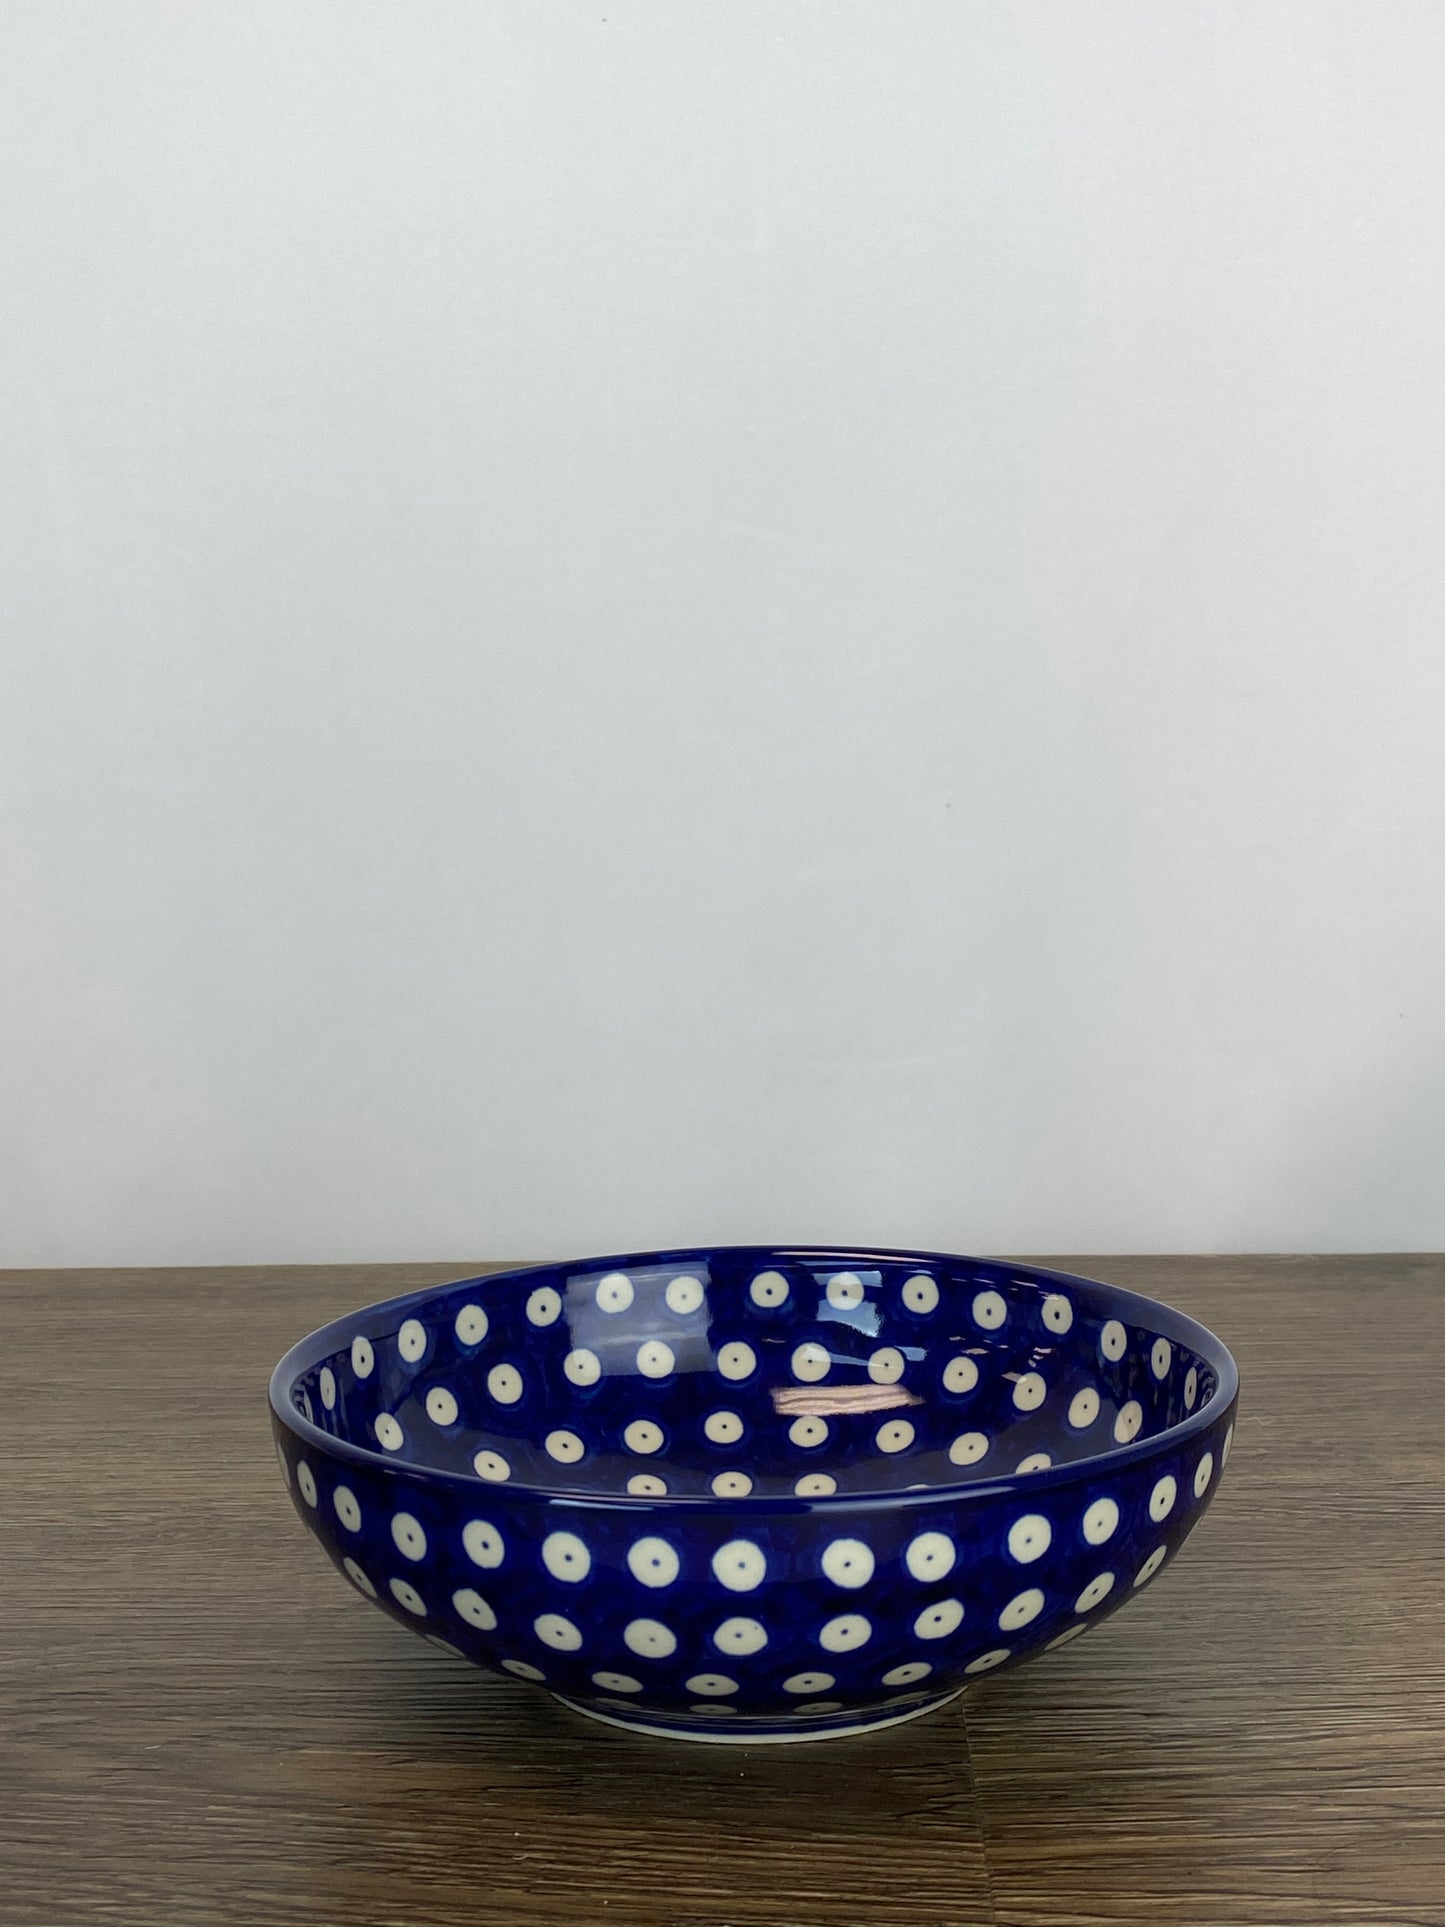 6.5" Cereal / Serving Bowl - Shape B90 - Pattern 70a